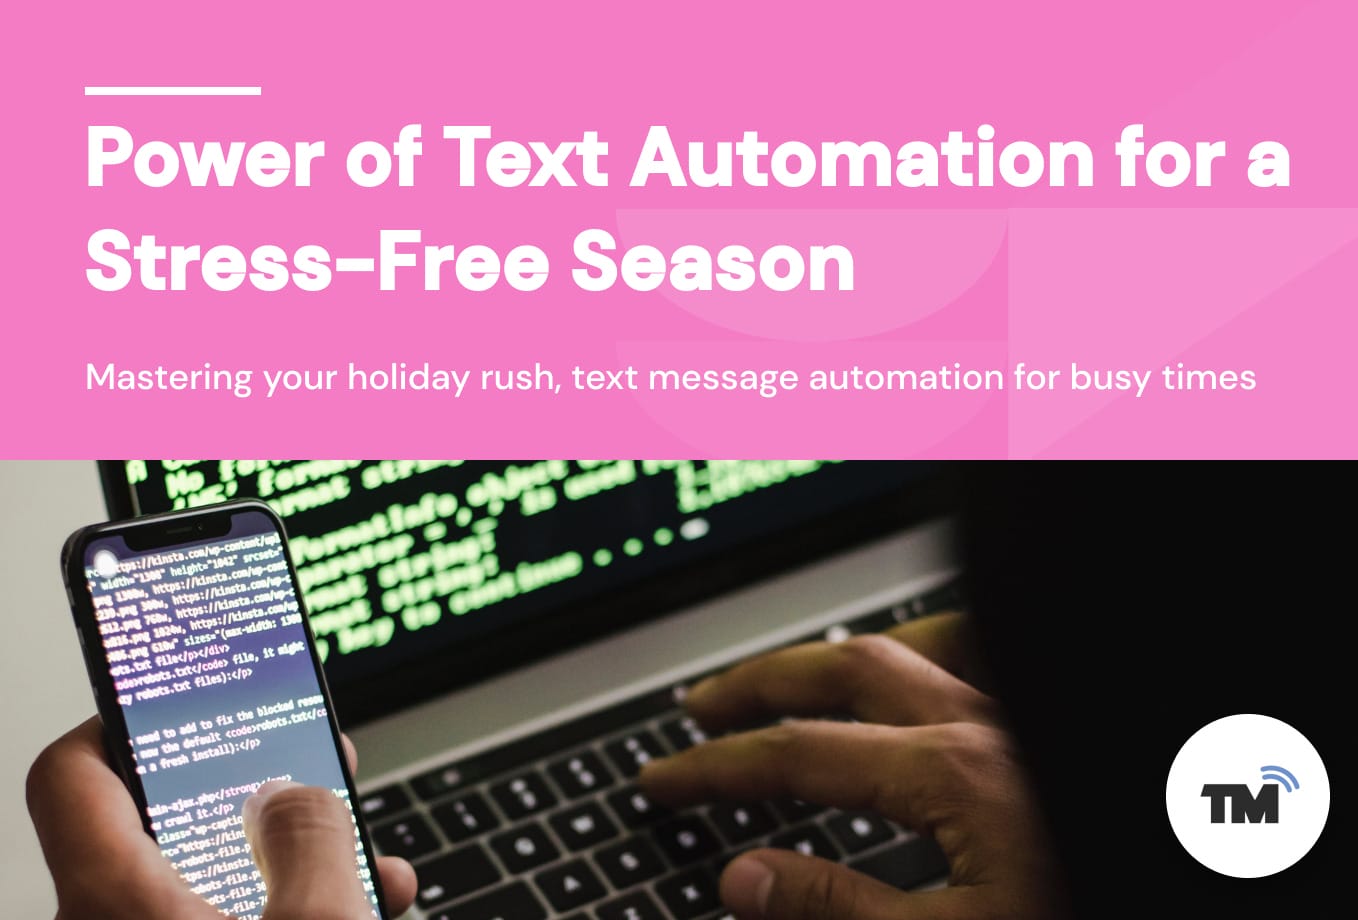 Mastering your holiday rush, text message automation for busy times